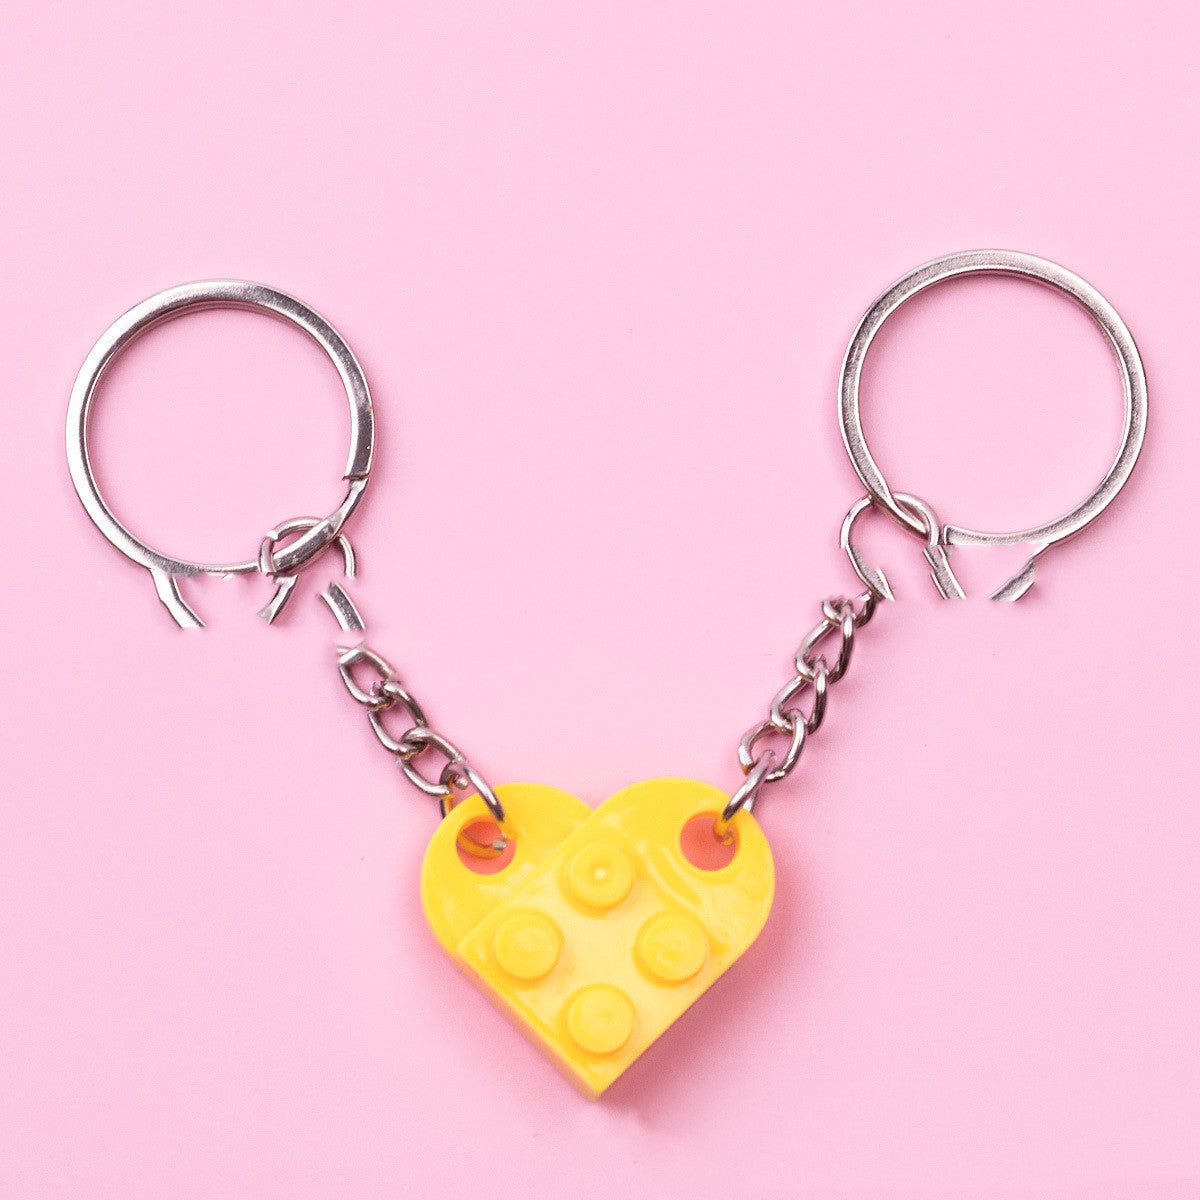 Heart Key Chain Valentines Day Gift Blocks Can Split Key Link Couples